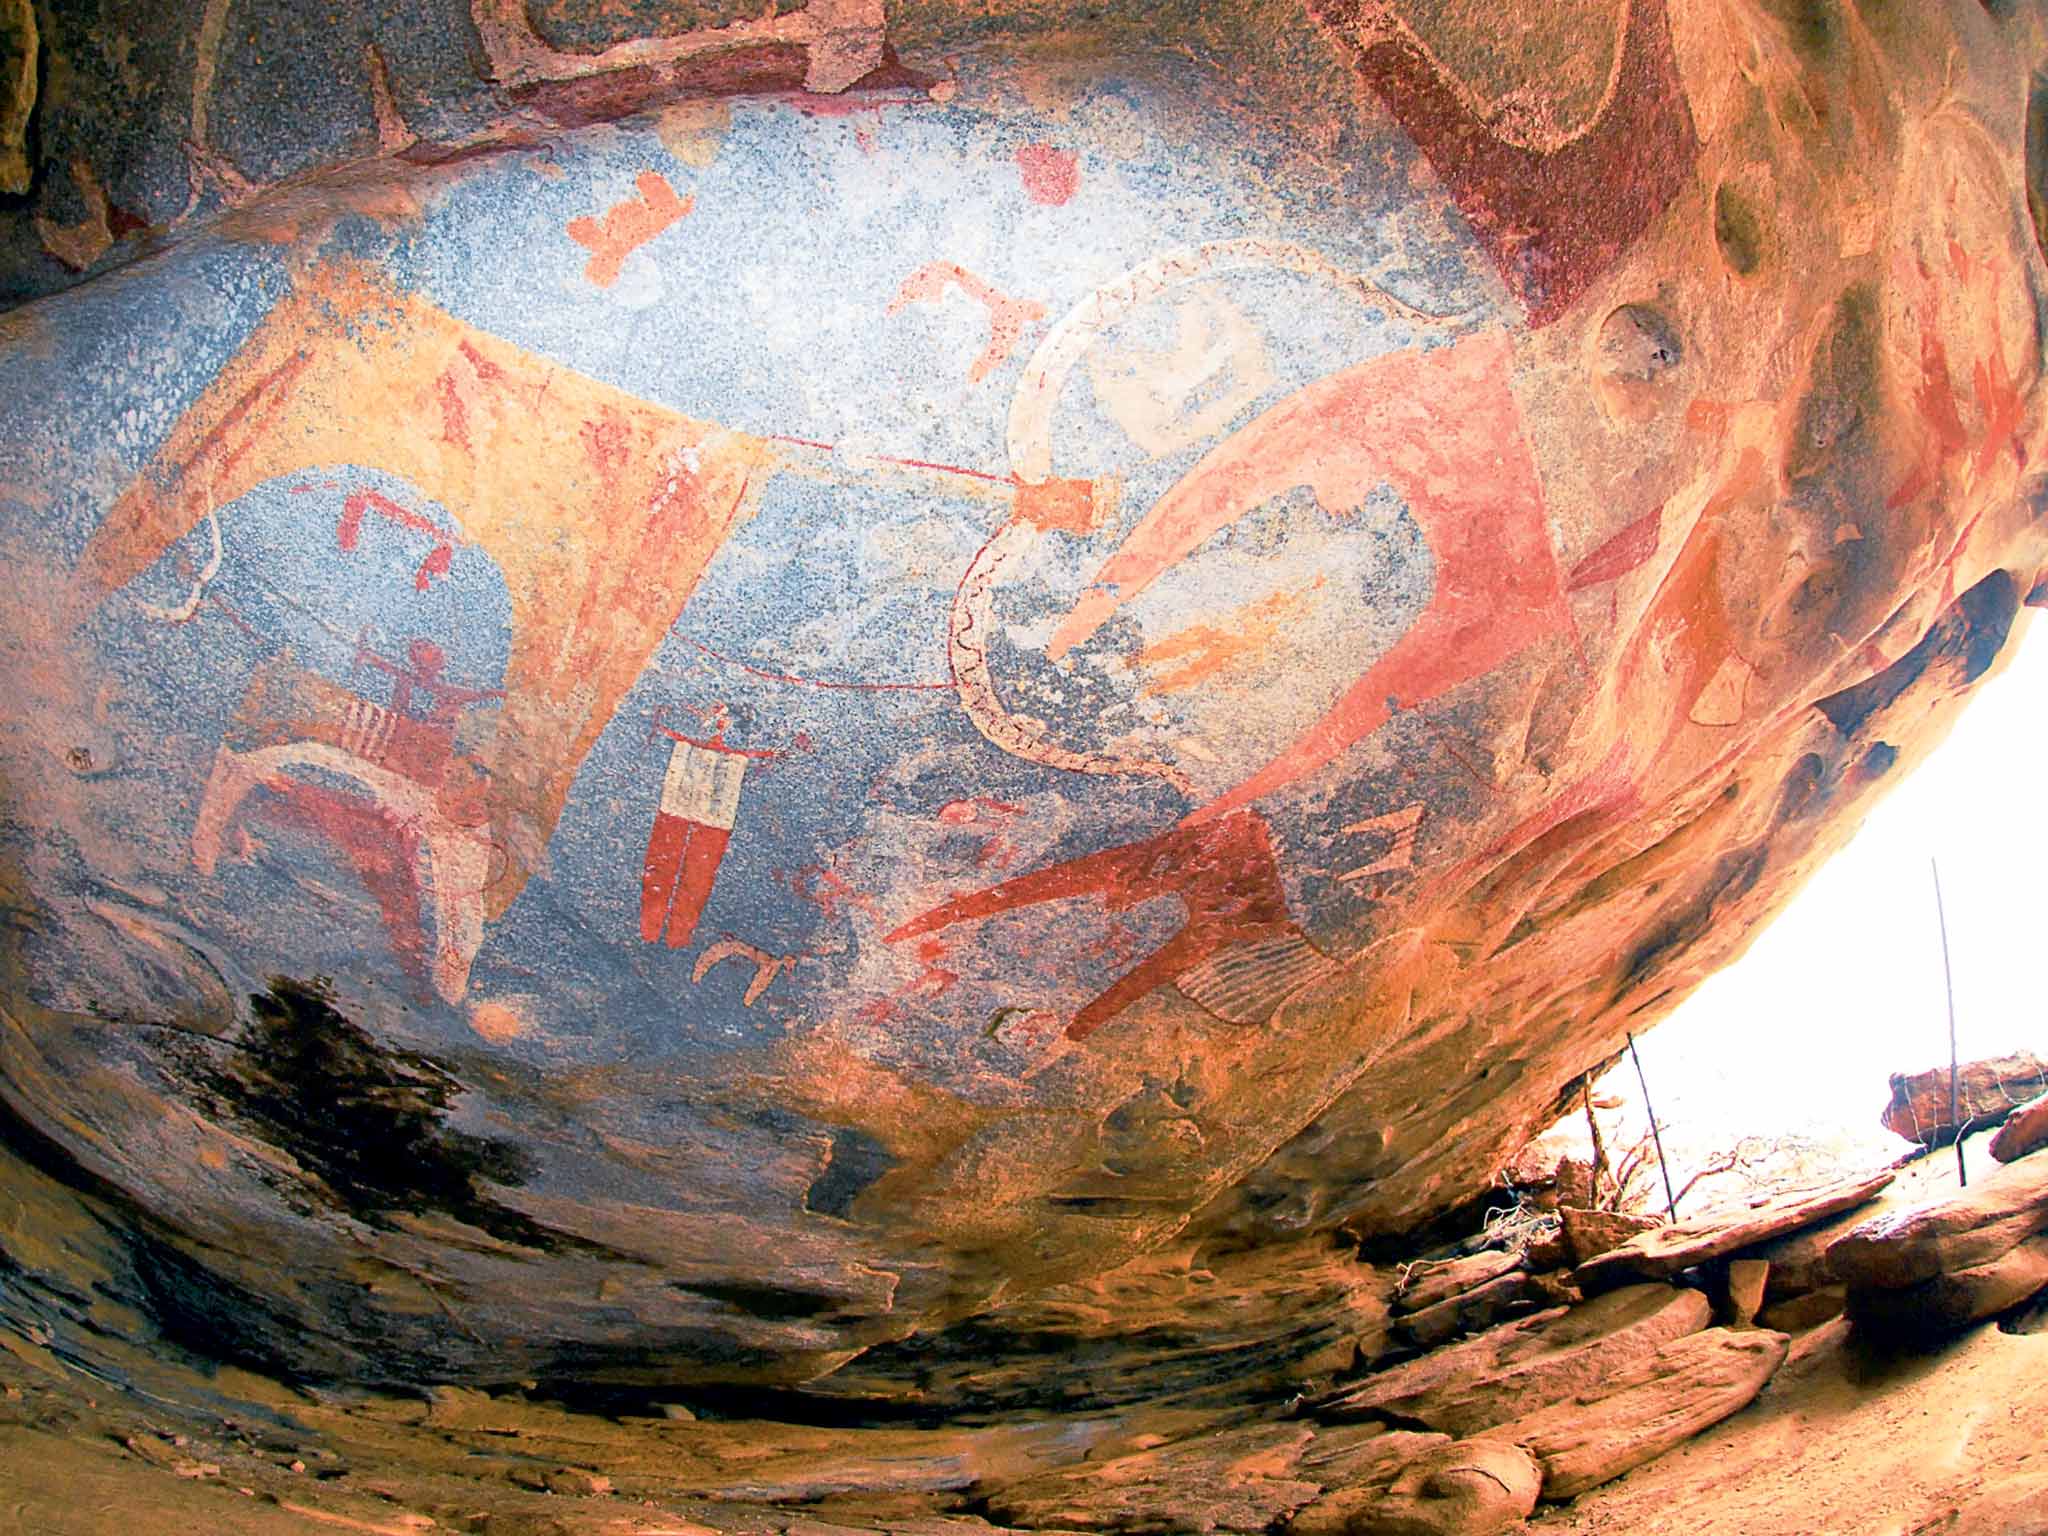 The painted roof of a low cave in Somaliland, which could be 3,000 years old, featuring large cows with huge decorated horns and humans in shirts and red trousers